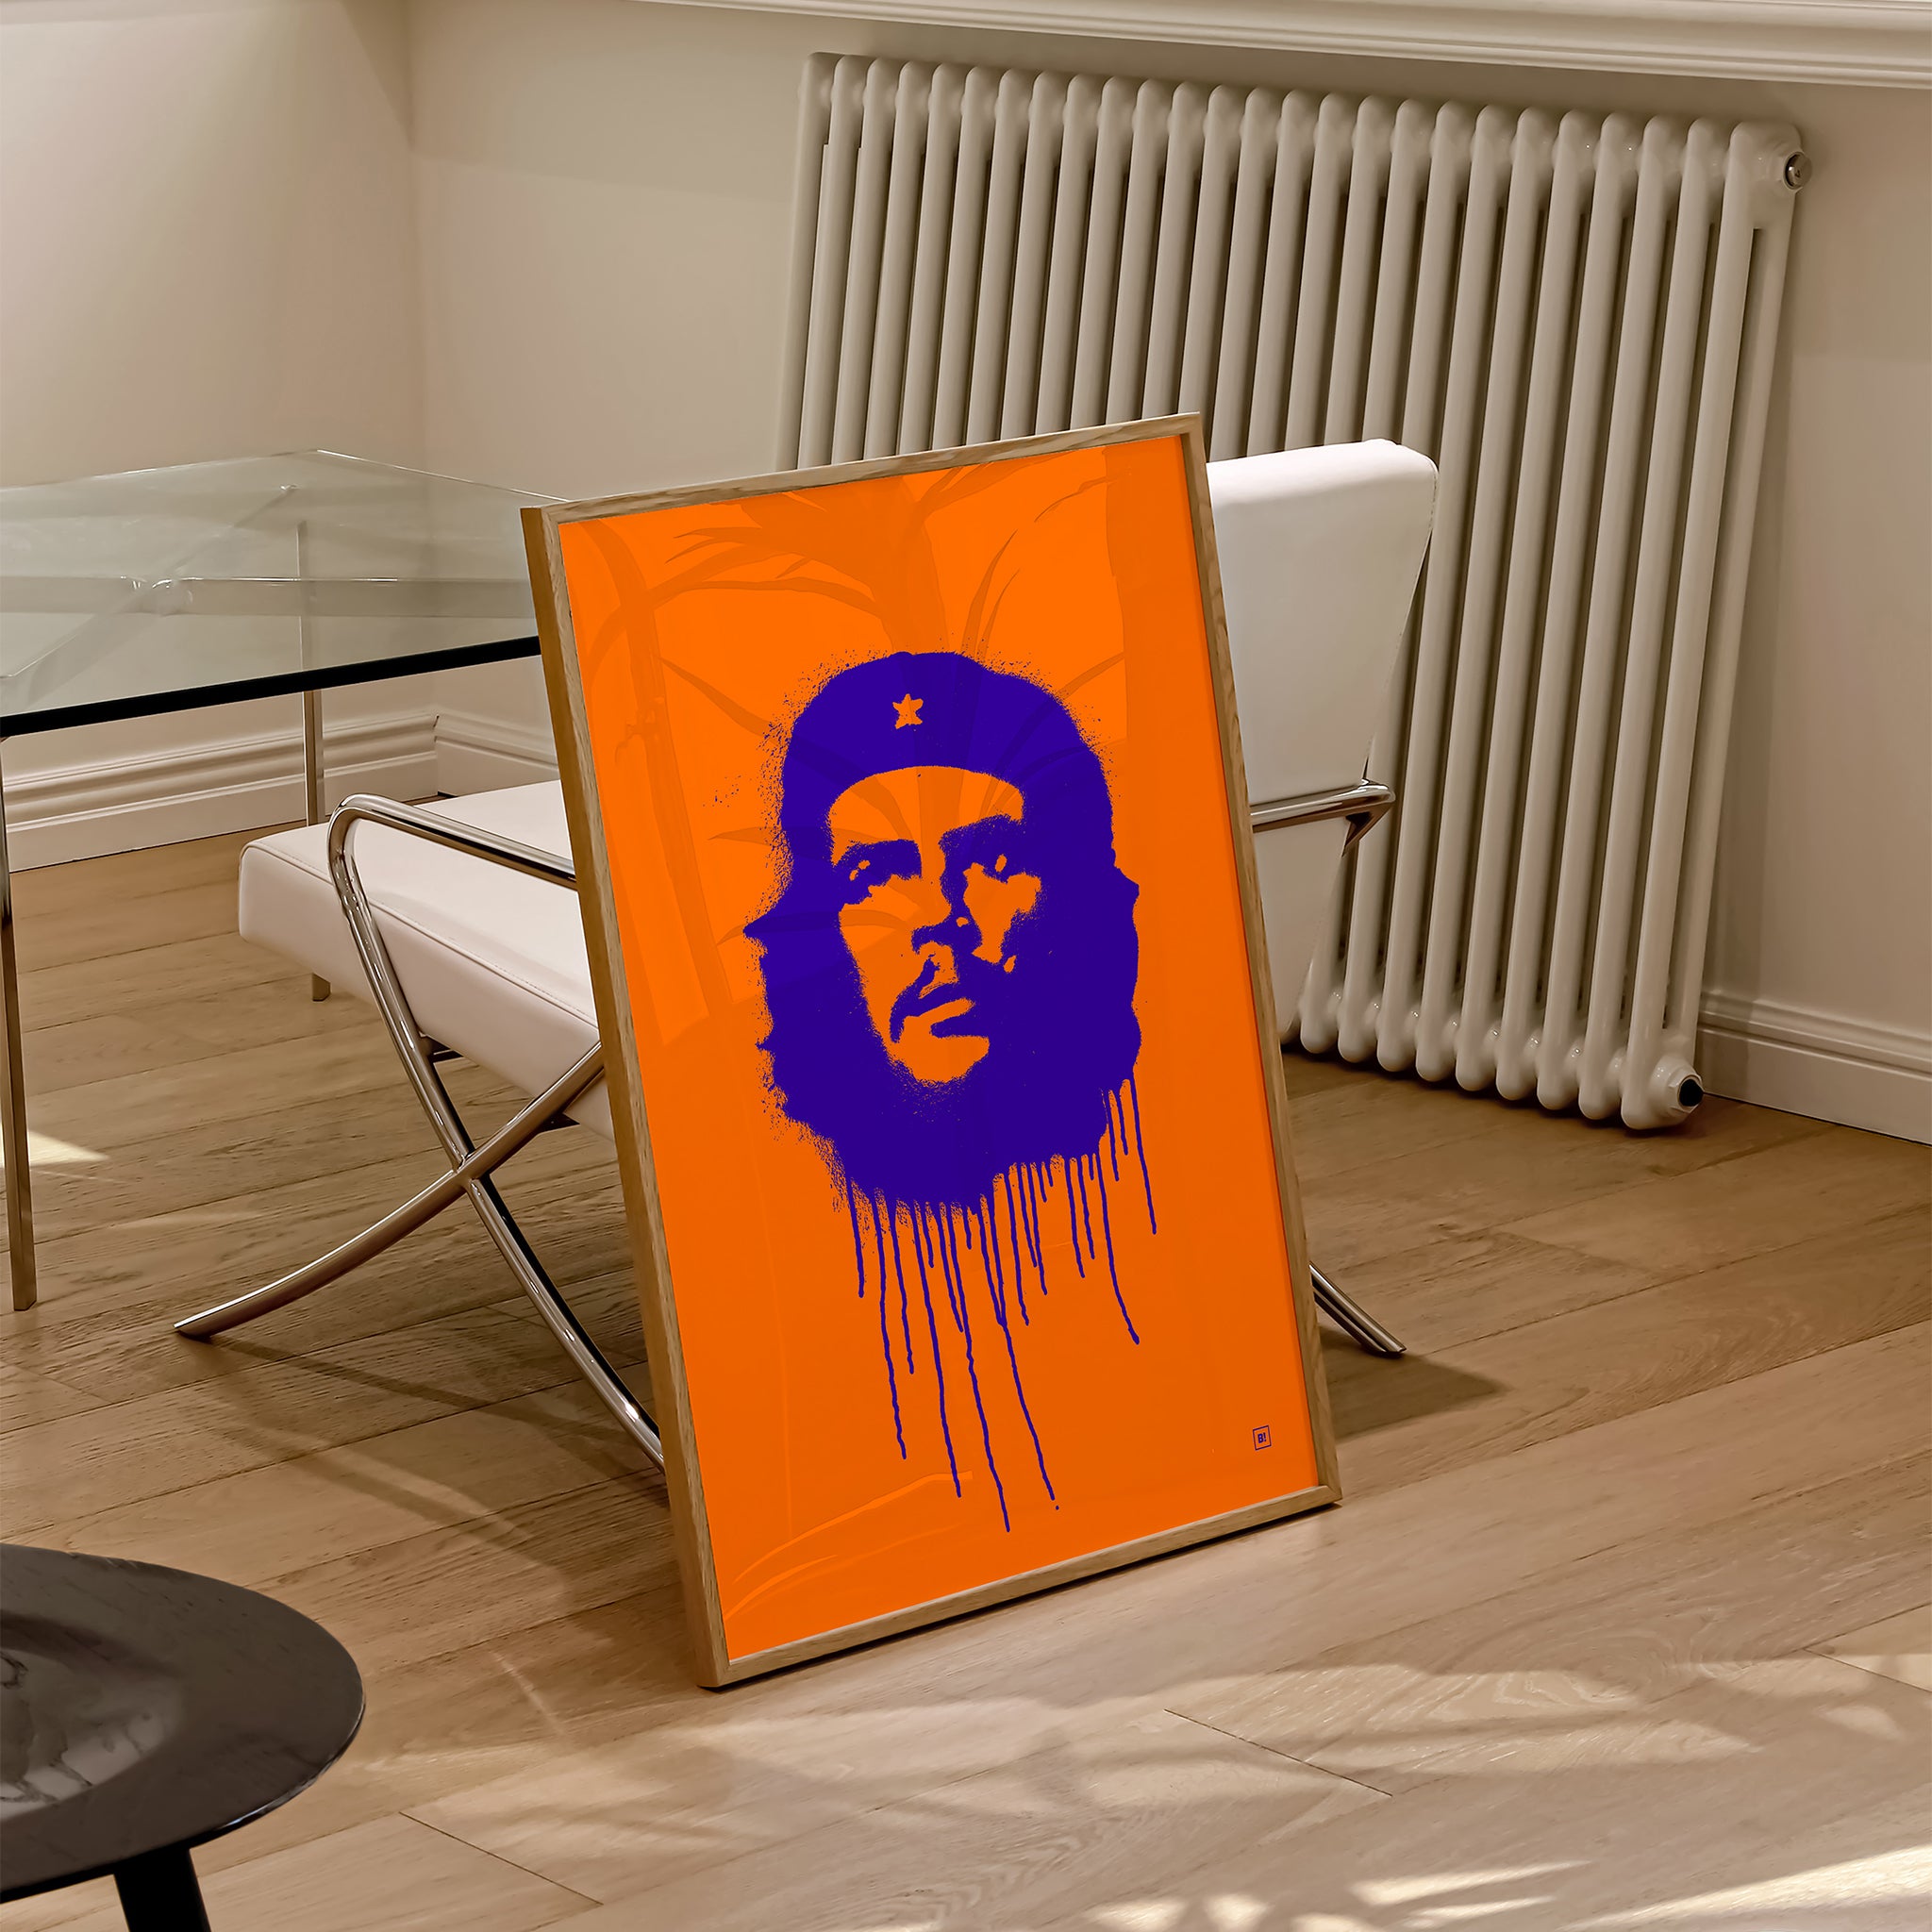 Be inspired by our pop navy "Ernesto Che Guevara" art print! This artwork was printed using the giclée process on archival acid-free paper and is presented in a natural oak frame, capturing its timeless beauty in every detail.